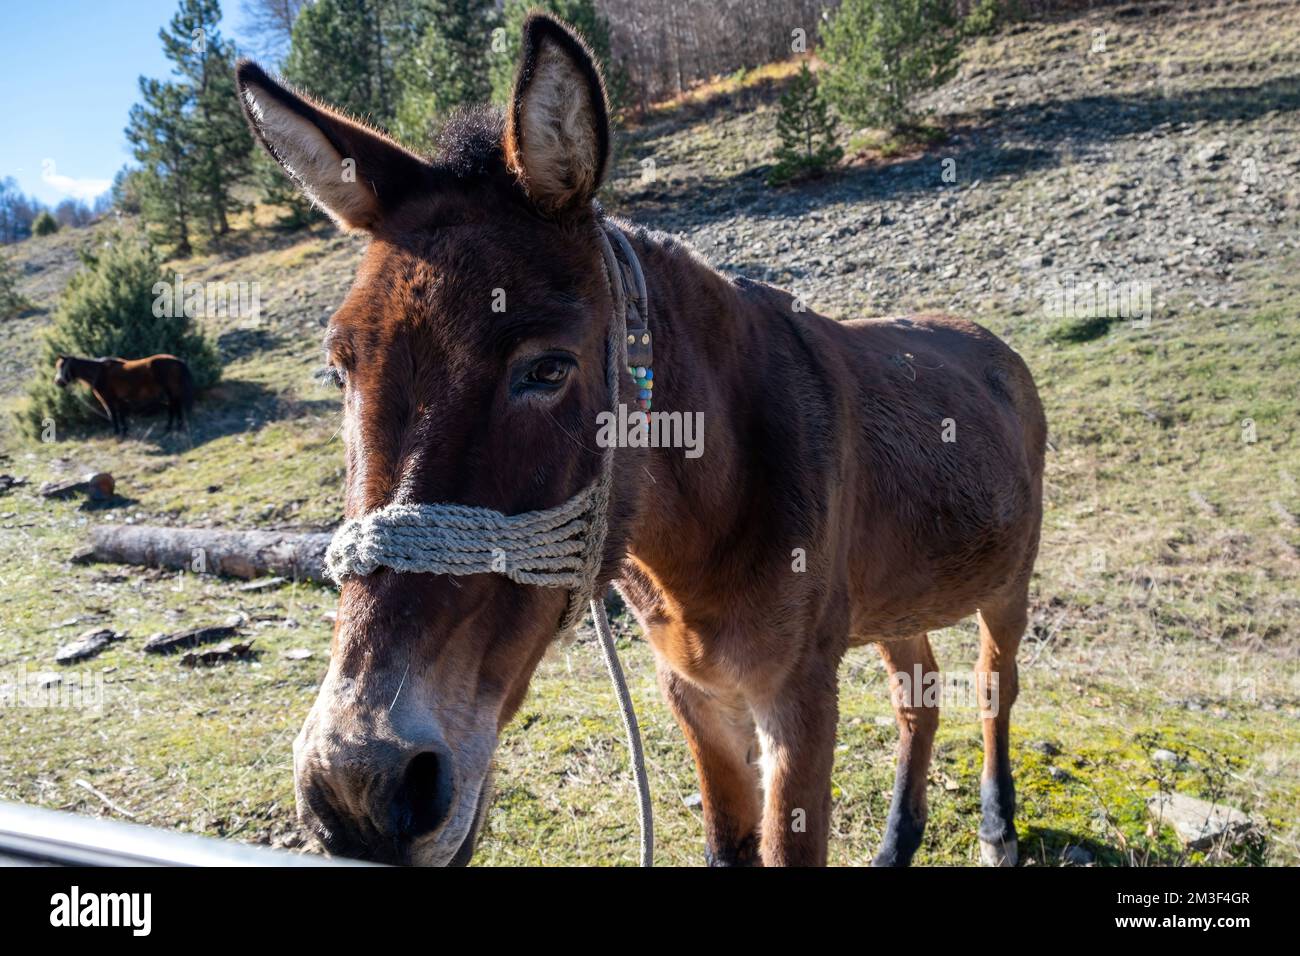 Brown donkey tied at stone rural field background. Portrait of domestic animal that looks at camera, sunny day, close up view. Stock Photo